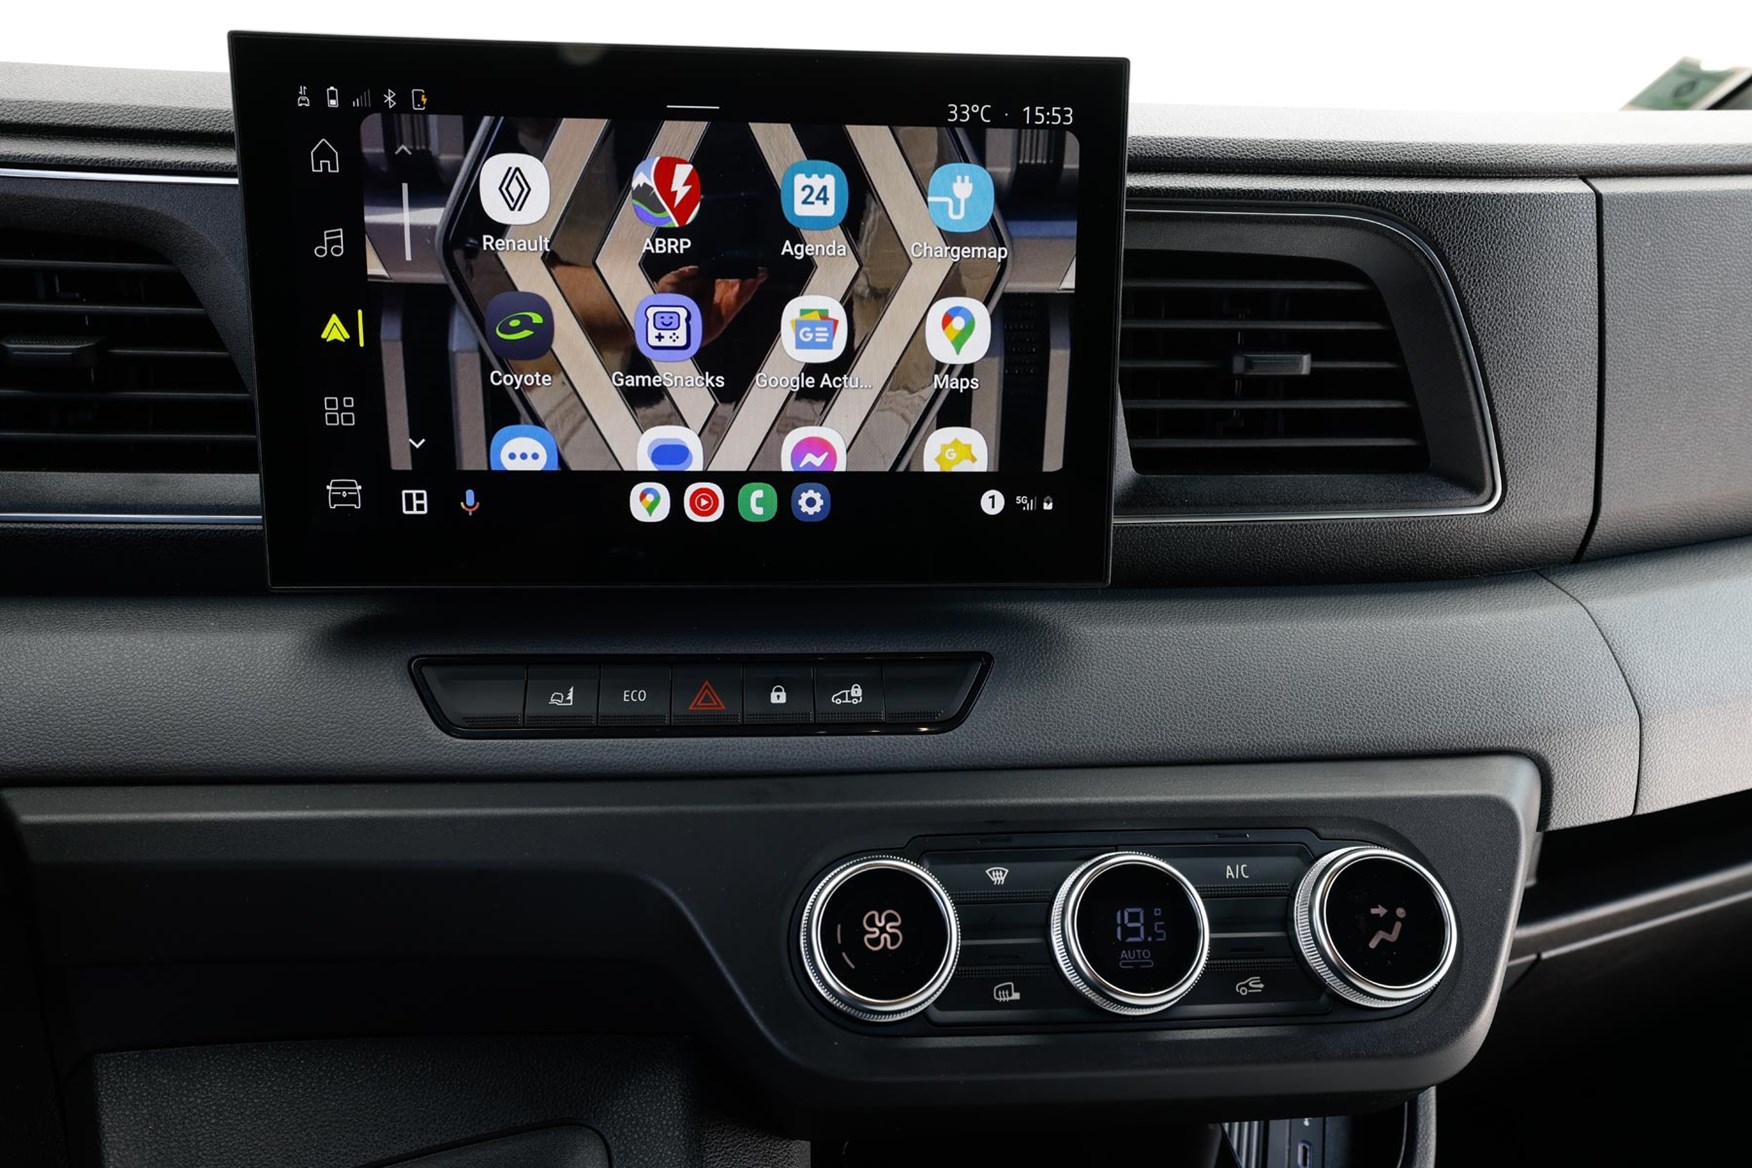 The screen on the dash is smart and easy to use.